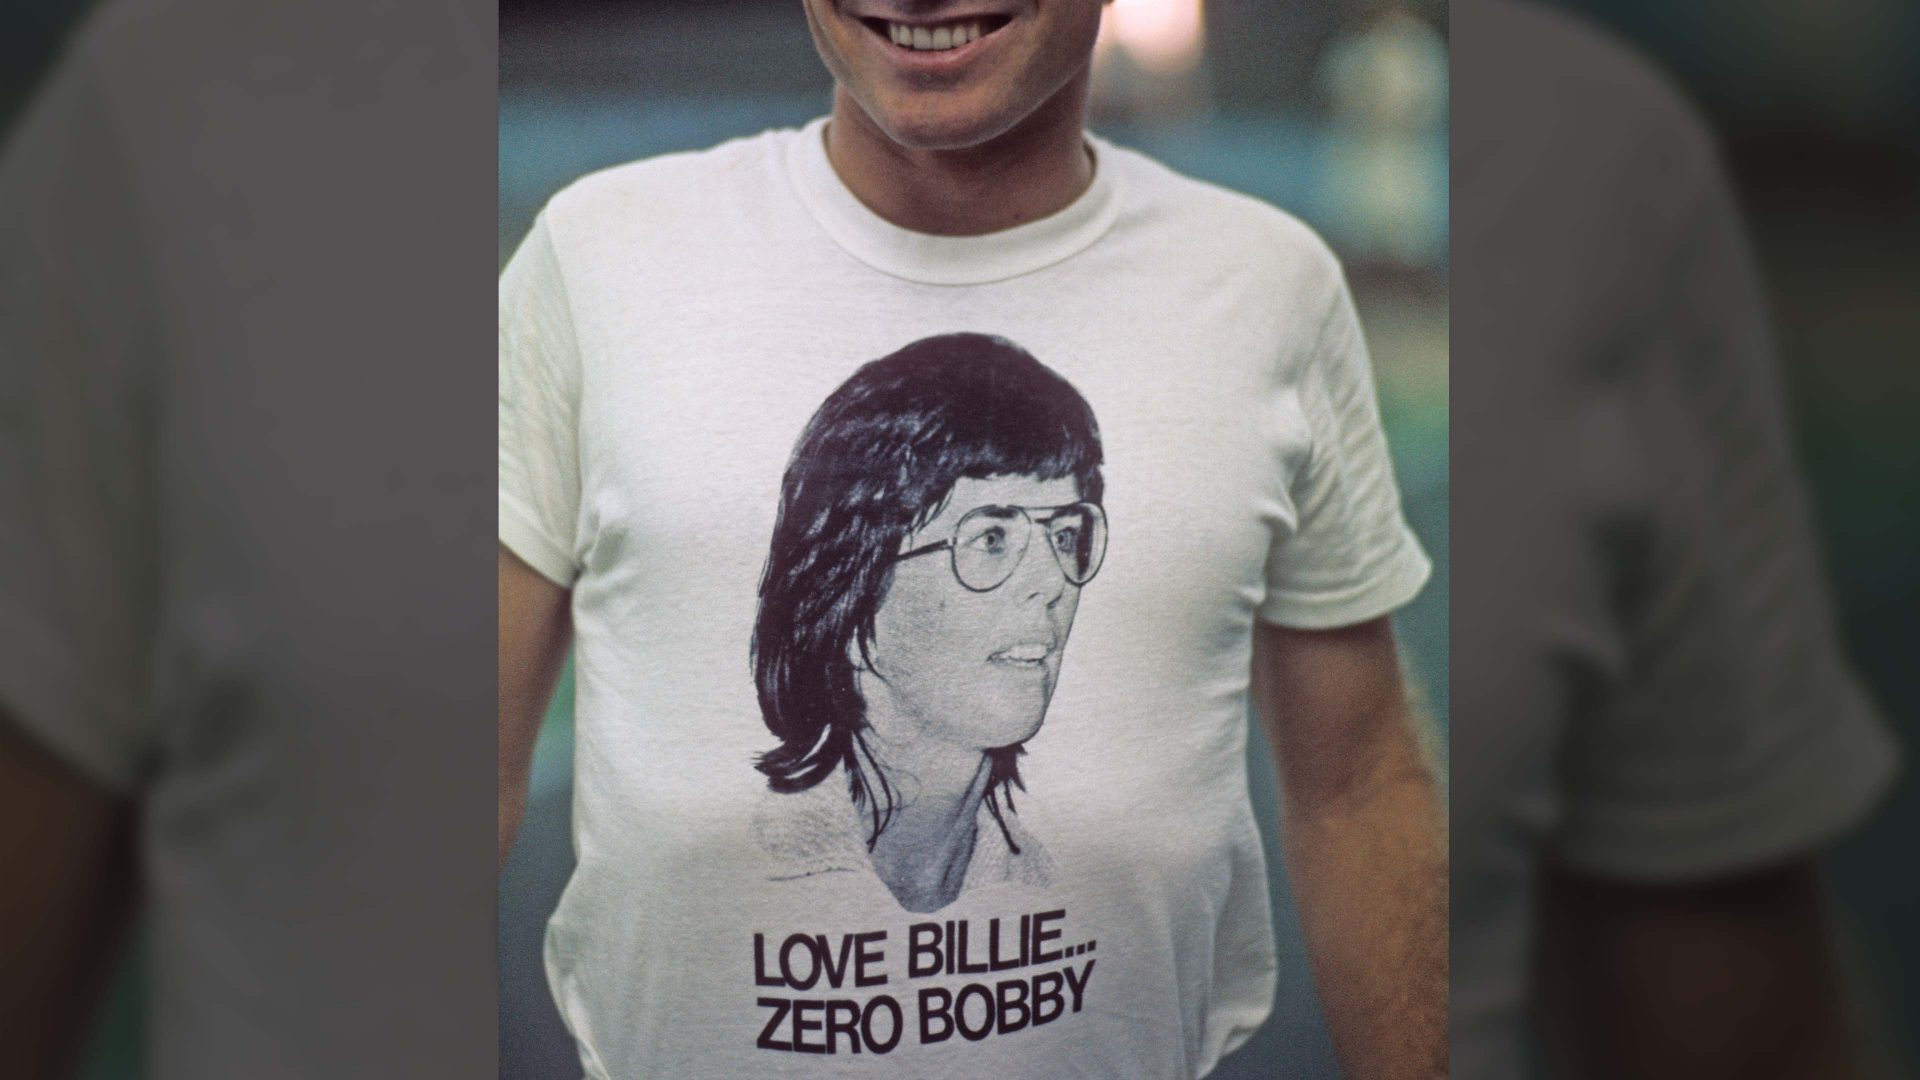 A fan shows his support for Billie Jean King before her match against Bobby Riggs in 1973. Photo: Jerry Cooke/ Sports Illustrated